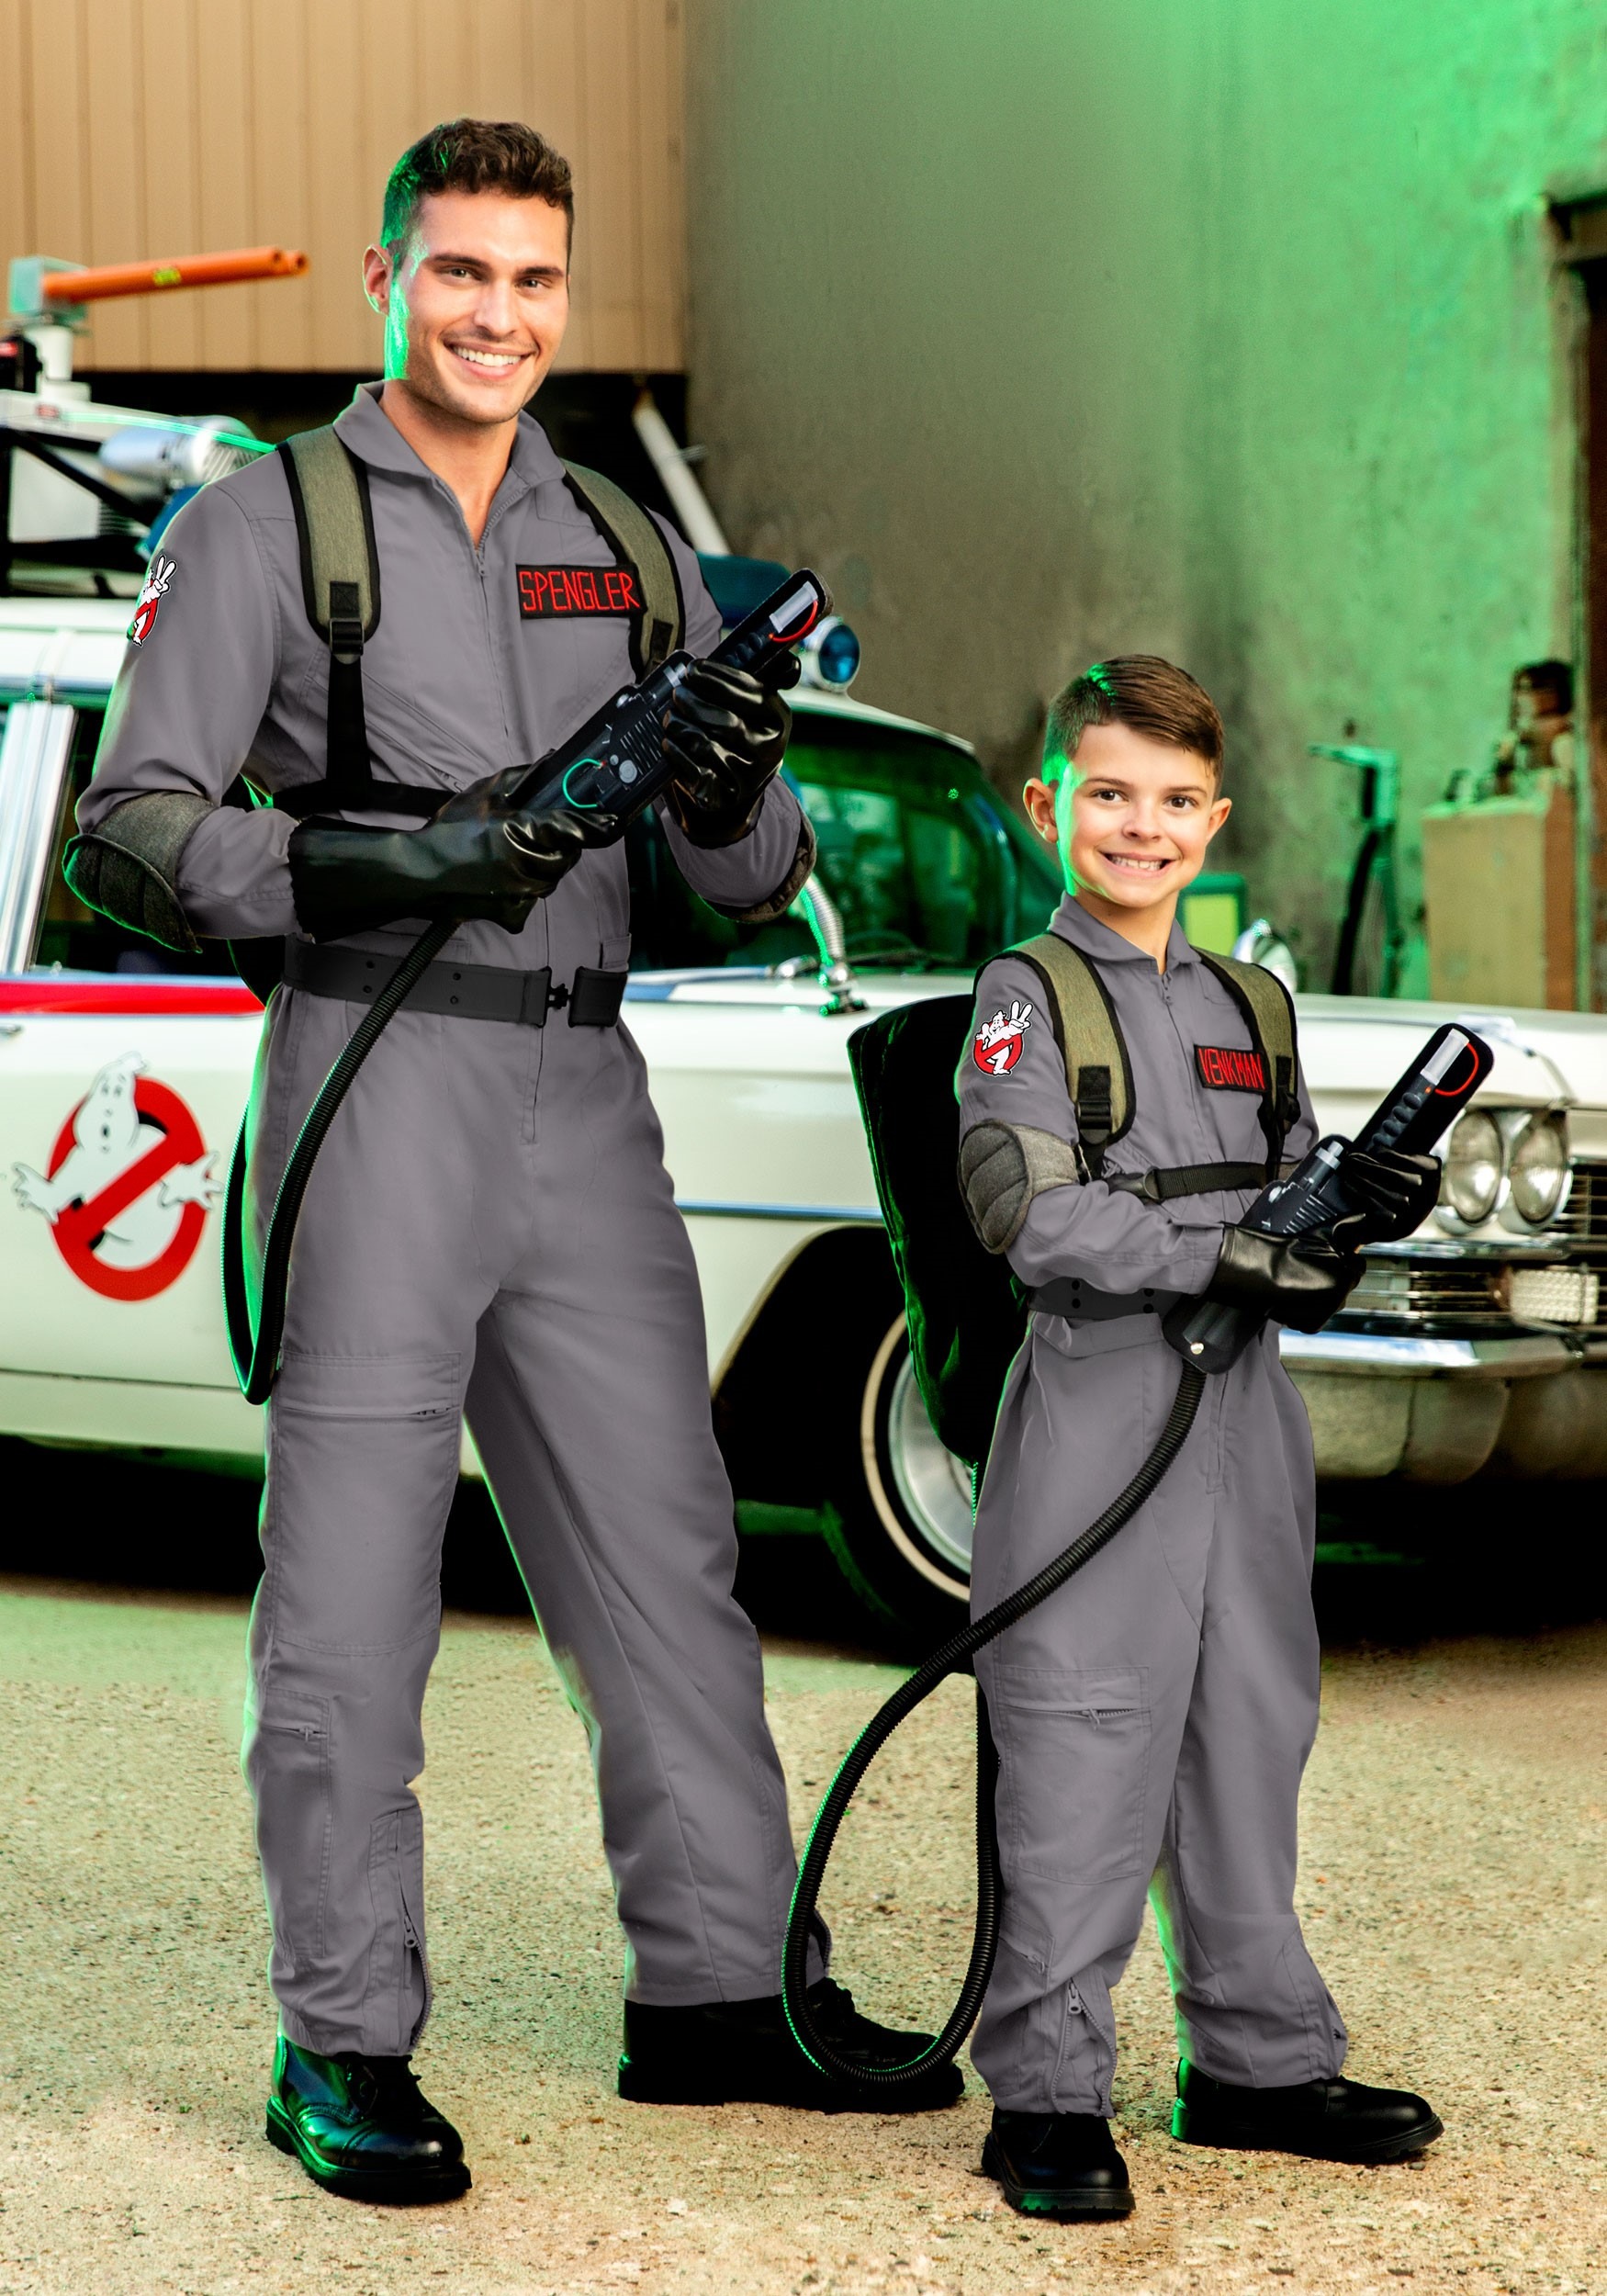 Details about   Strange Things Season 2 Cosplay Costume Ghostbusters Halloween Costumes 